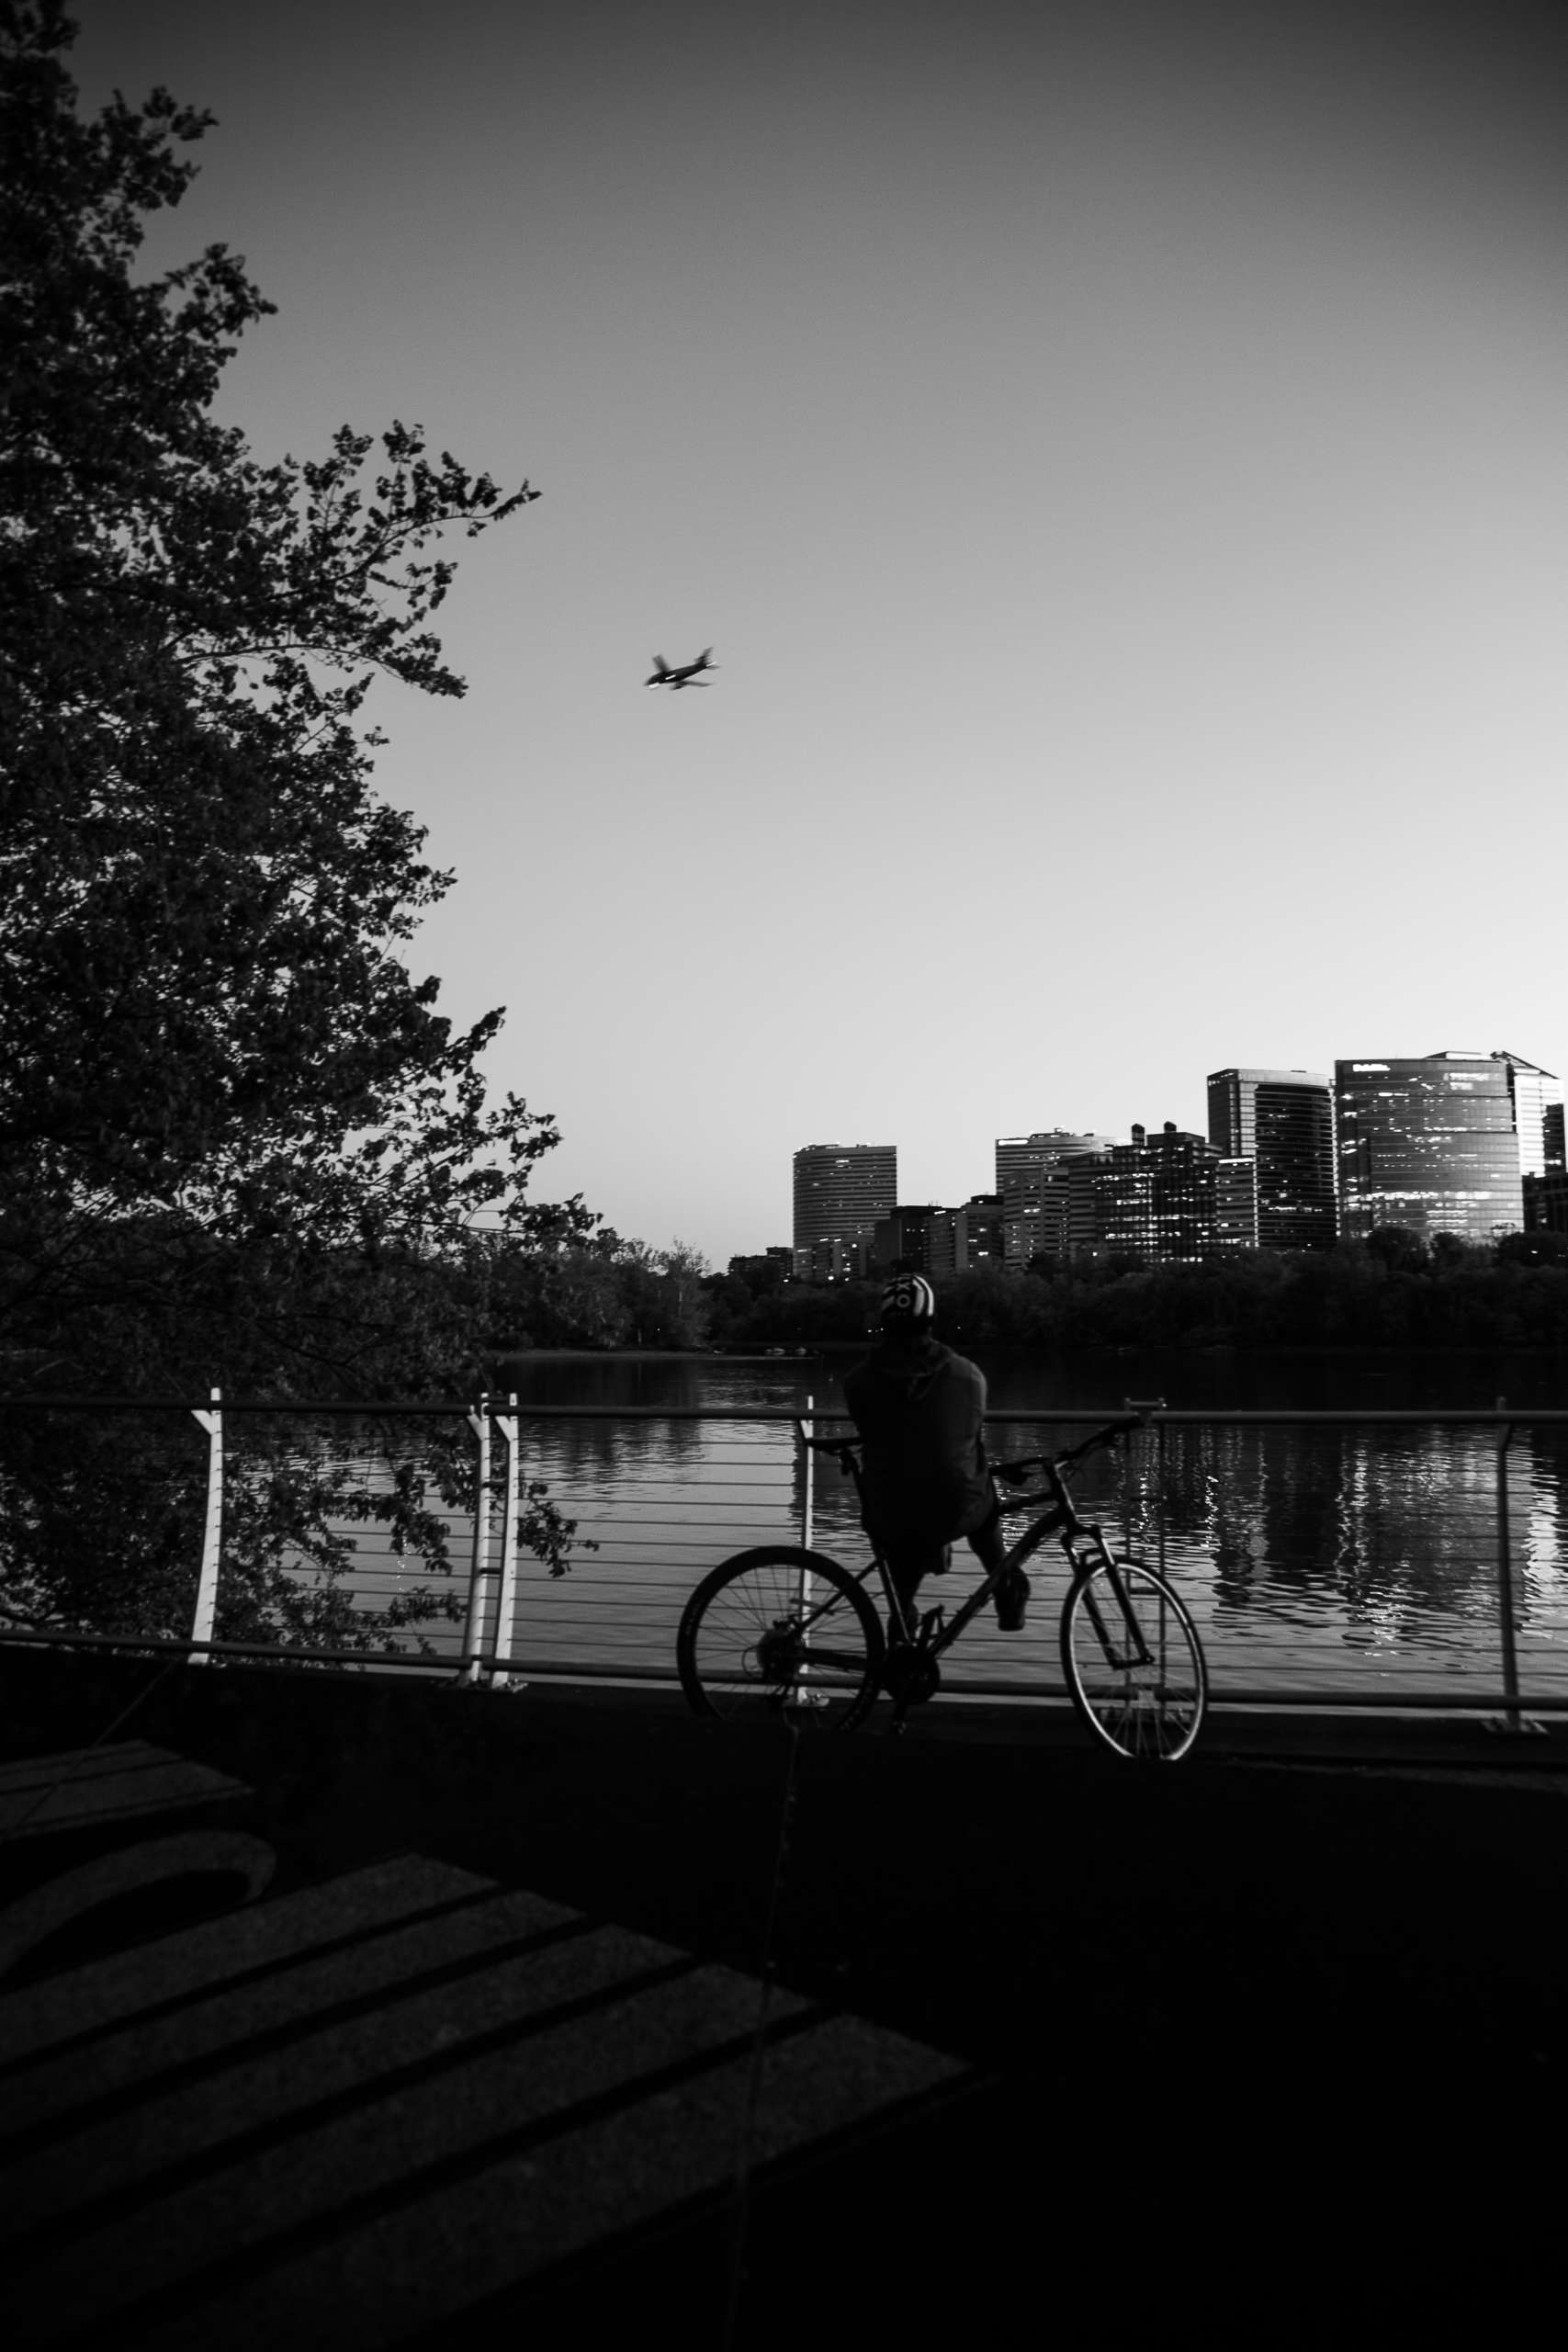 A black-and-white photo. A cyclist pauses by a guard rail overlooking a reflecting body of water, with downtown city buildings on the opposite bank. A plane flies low in the sky.